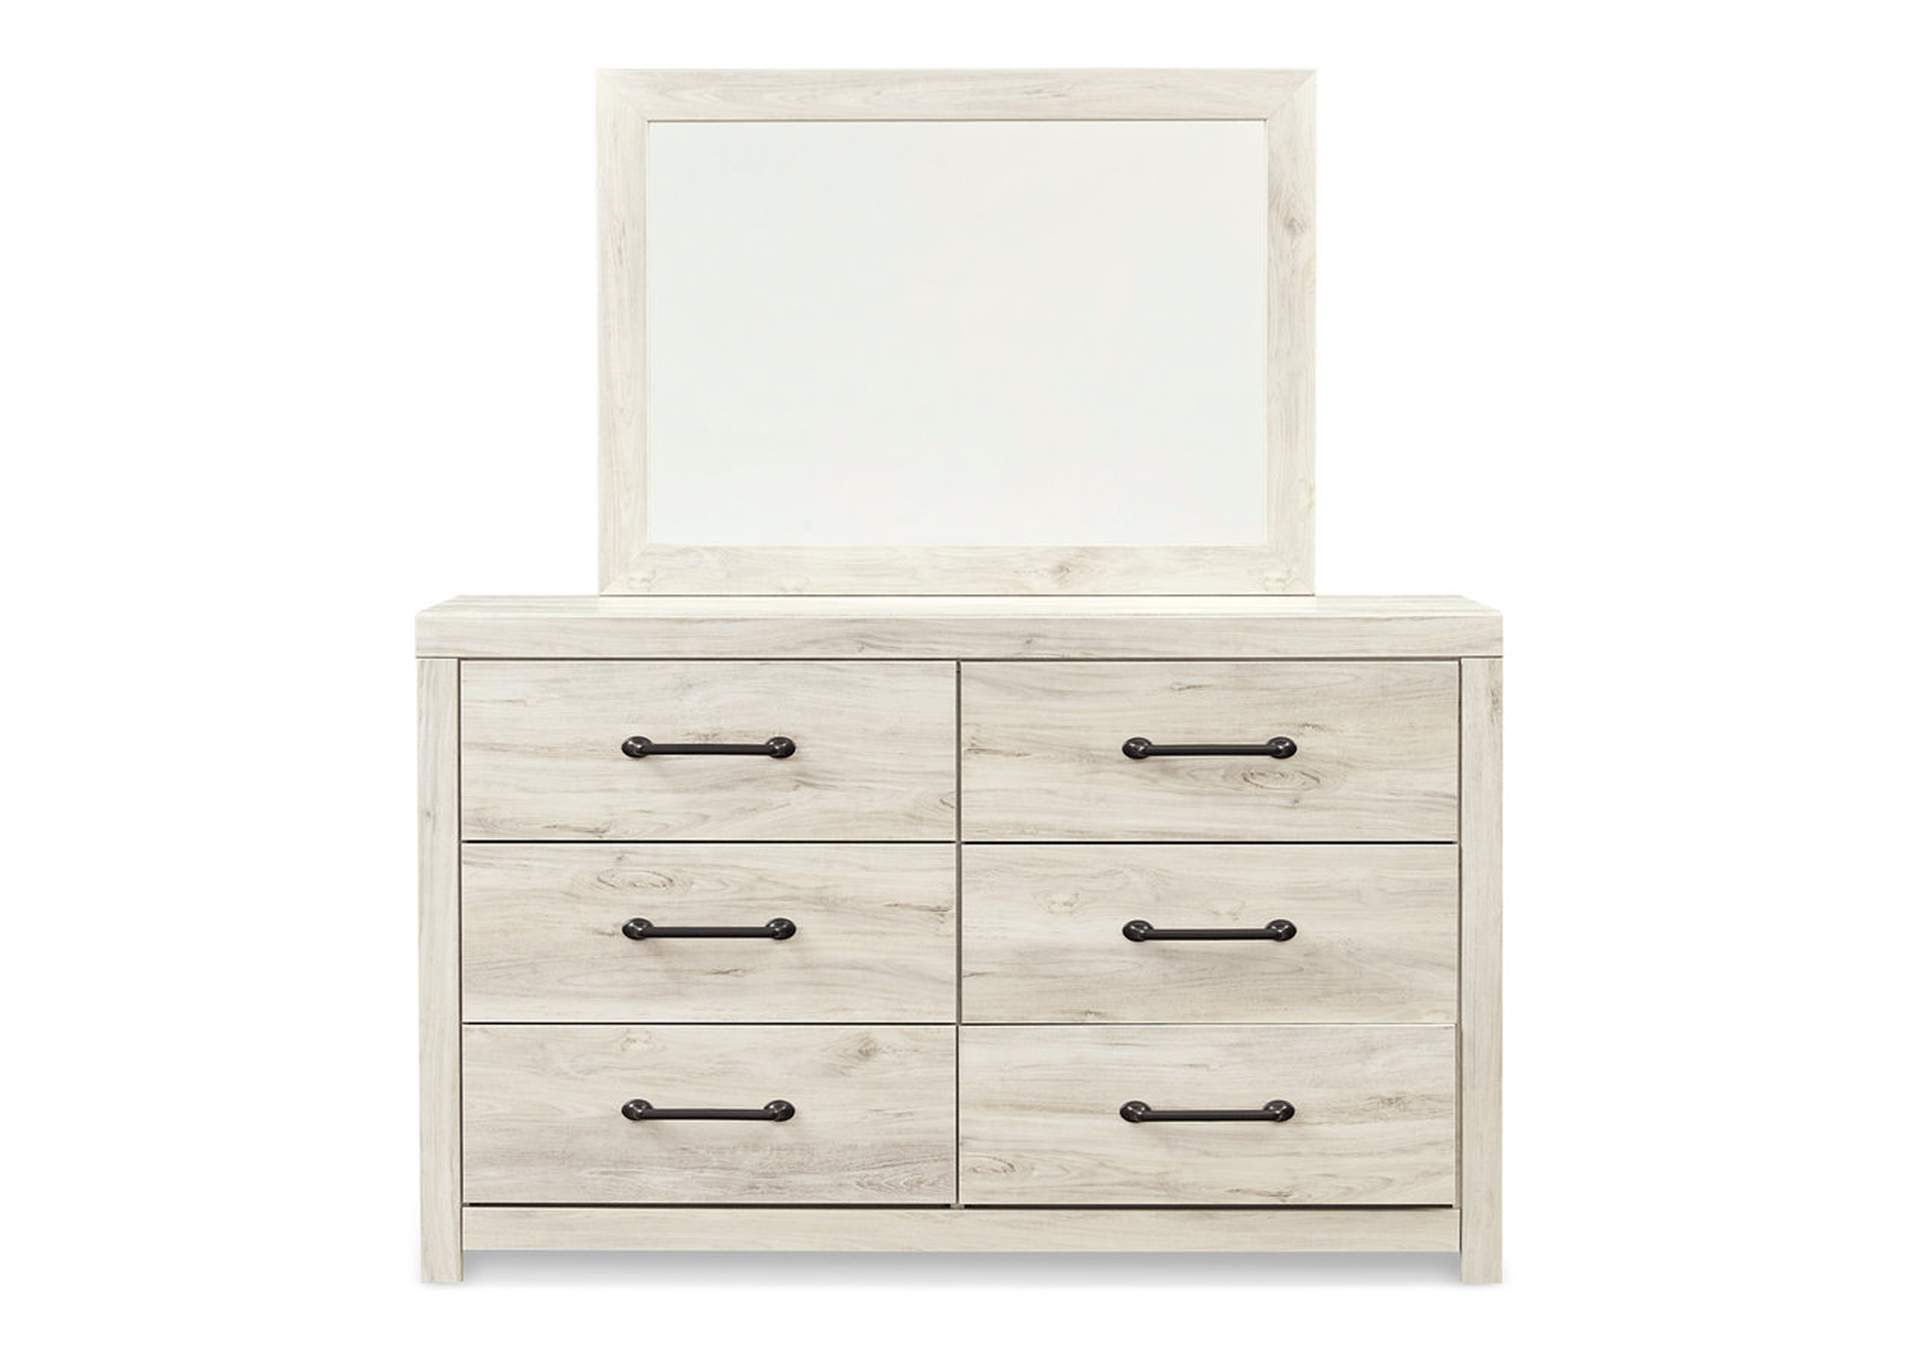 Cambeck Full Panel Bed with 2 Storage Drawers with Mirrored Dresser, Chest and Nightstand,Signature Design By Ashley